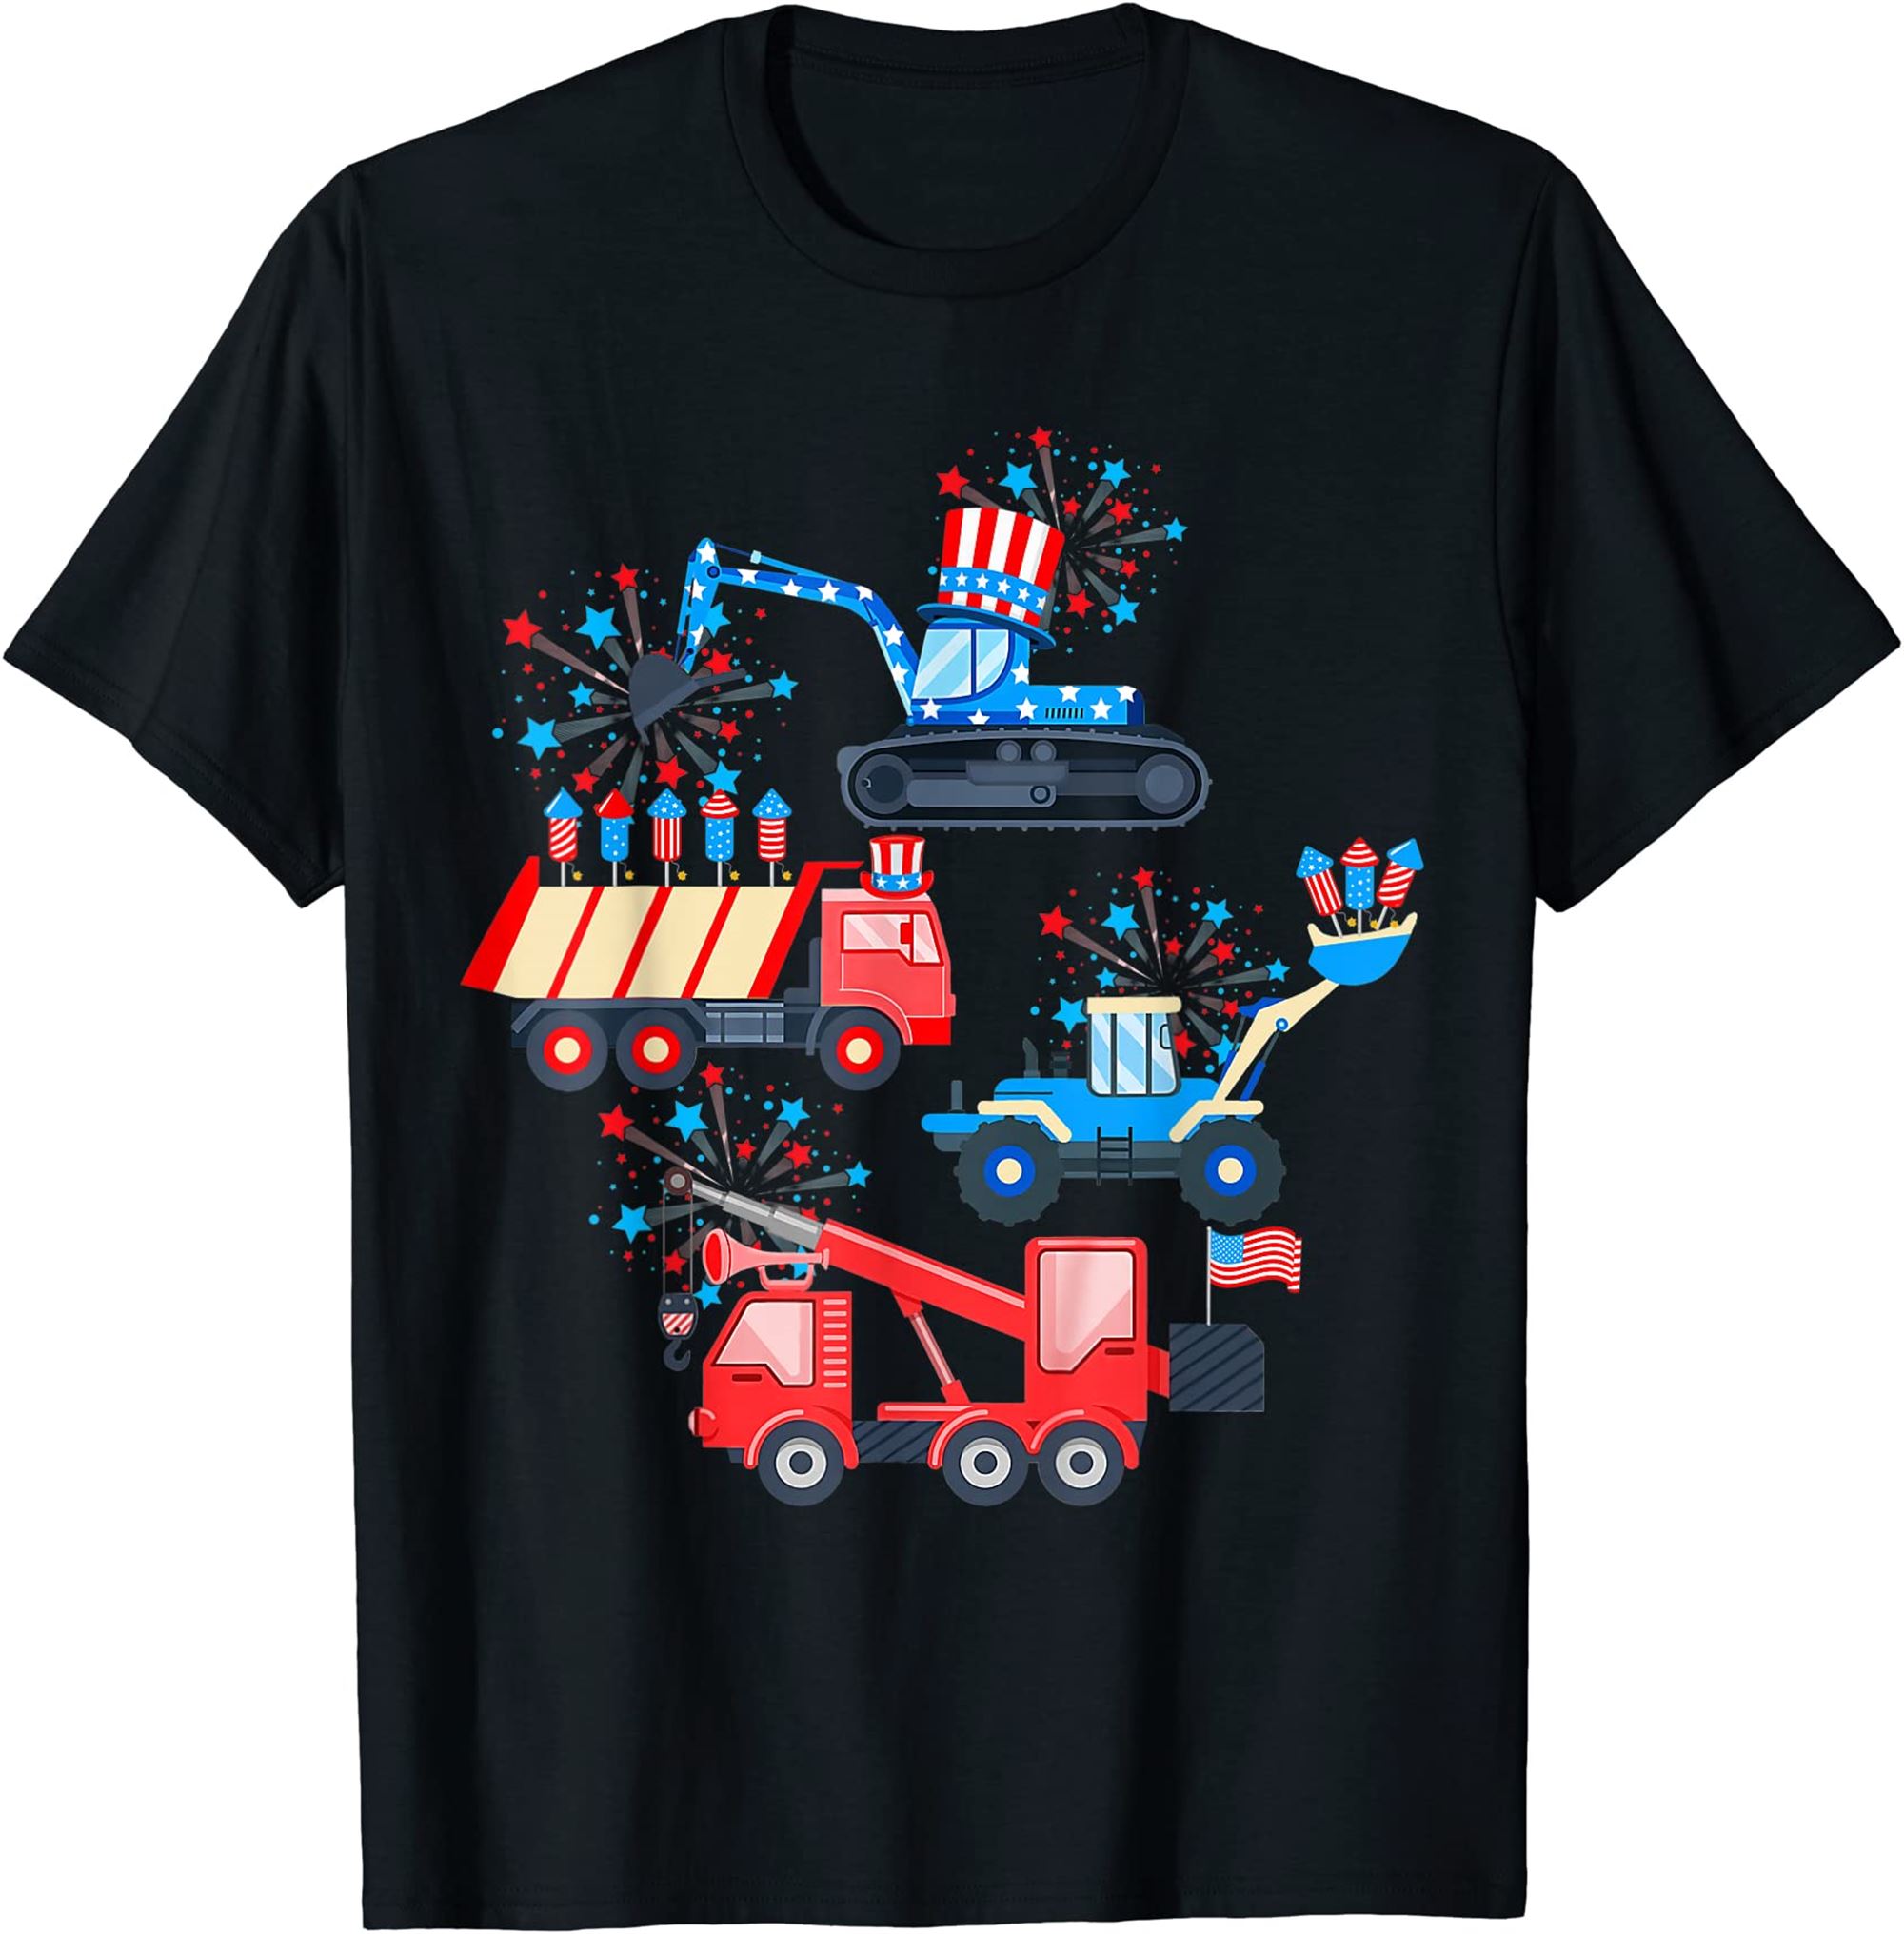 Happy 4th Of July Crane Truck Construction Toddler Kids Boys T-shirt Size Up To 5xl